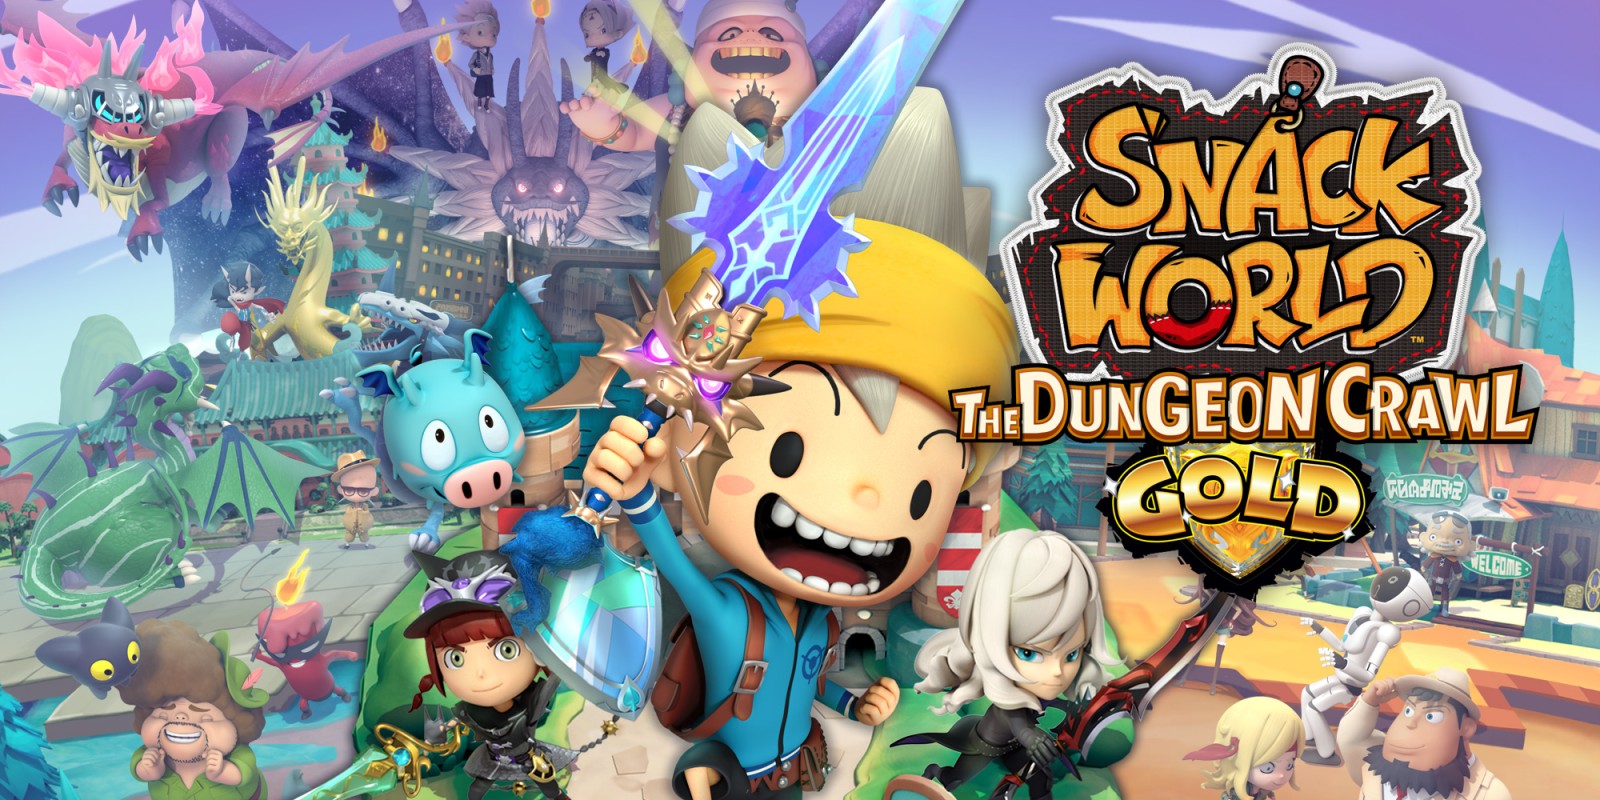 SNACK WORLD: THE DUNGEON CRAWL – GOLD